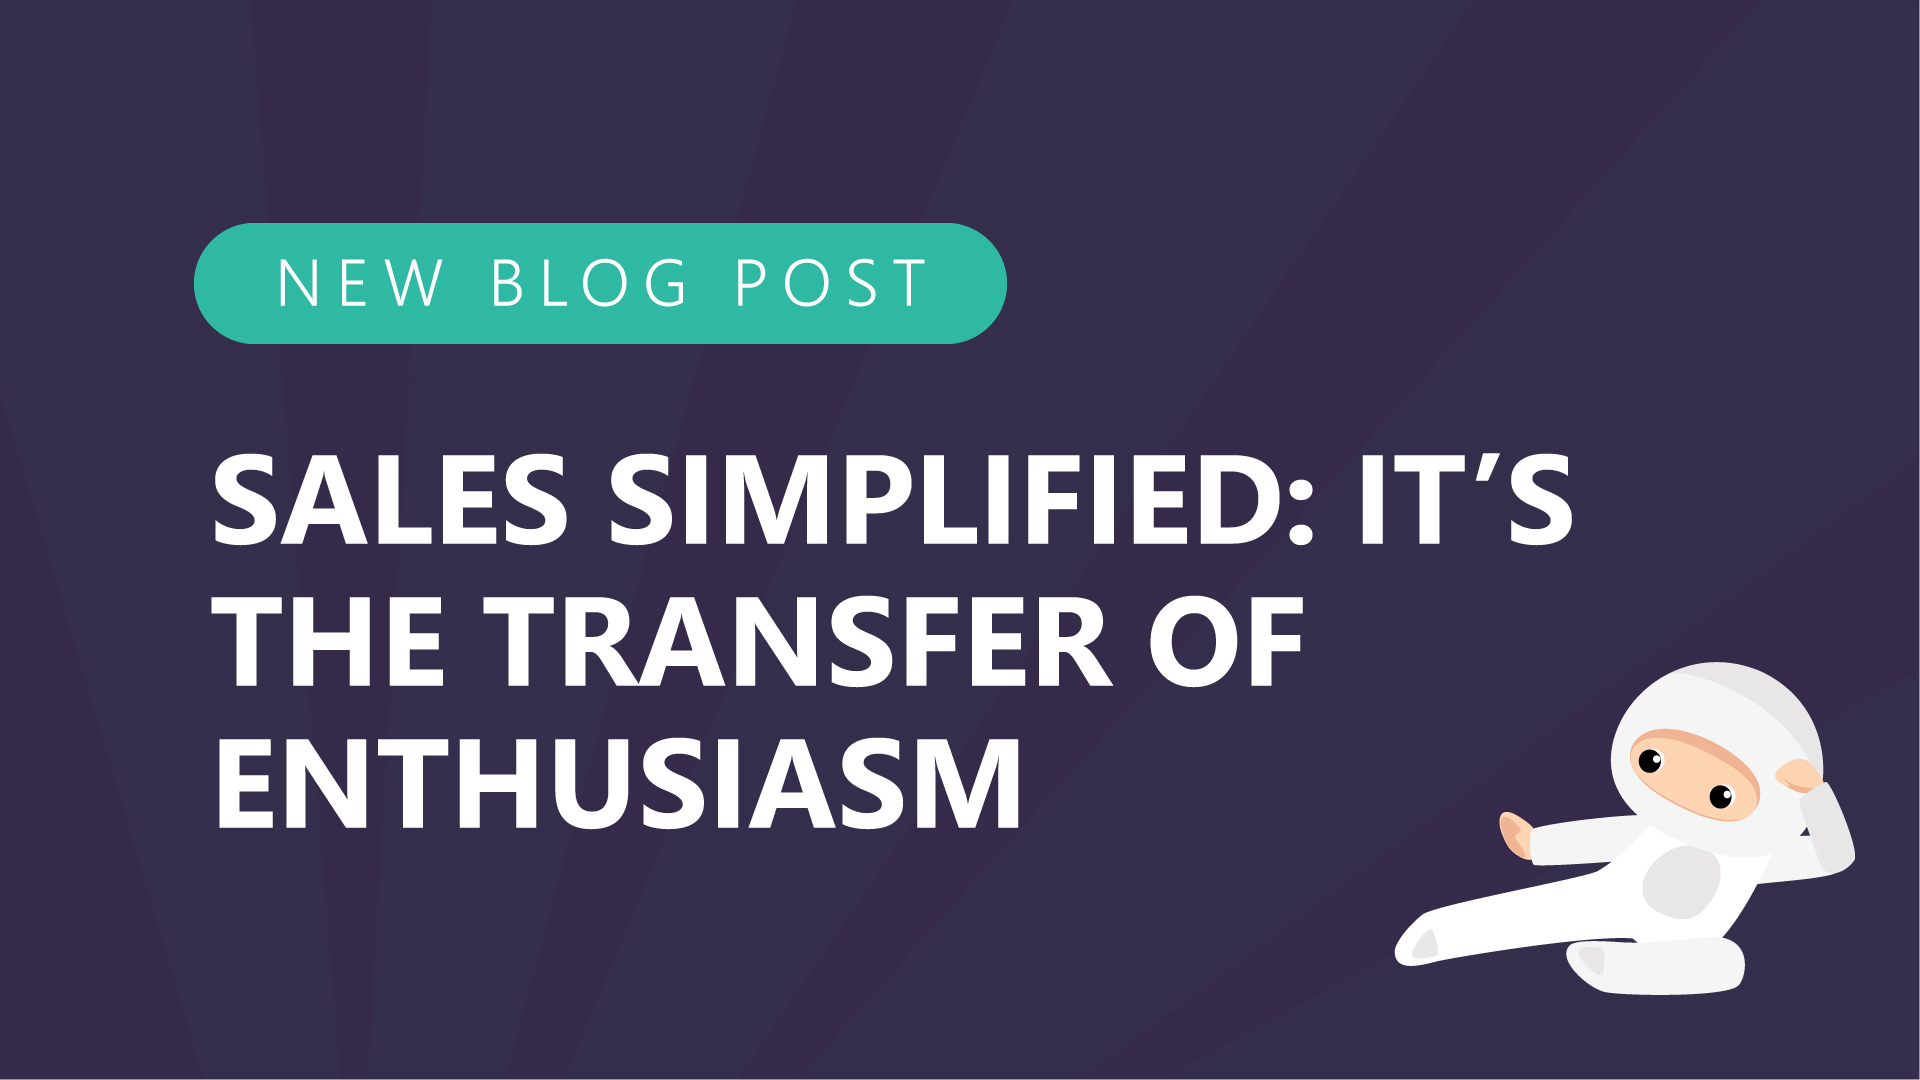 43-Sales-Simplified-Its-The-Transfer-of-Enthusiasm.jpg